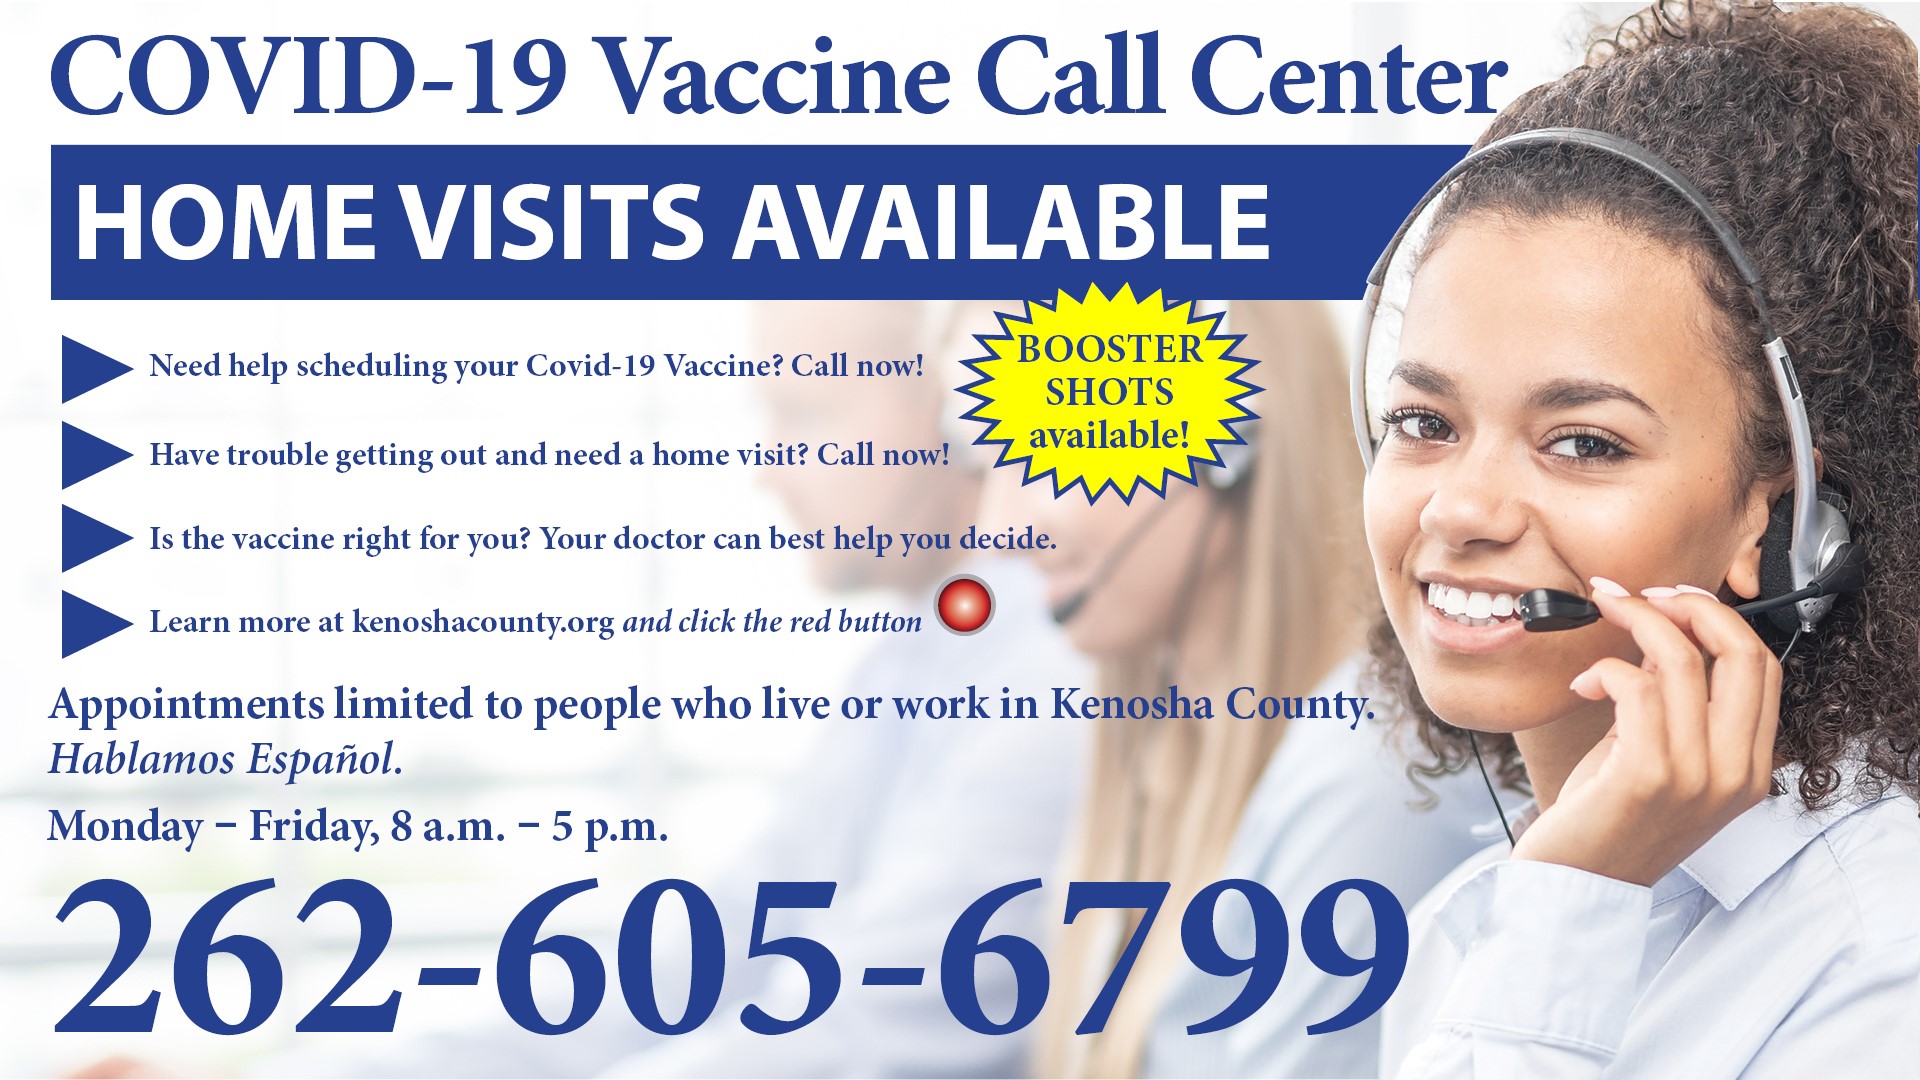 Vaccination Call Center ad picture of call center worker smiling 262-605-6799 Boosters available